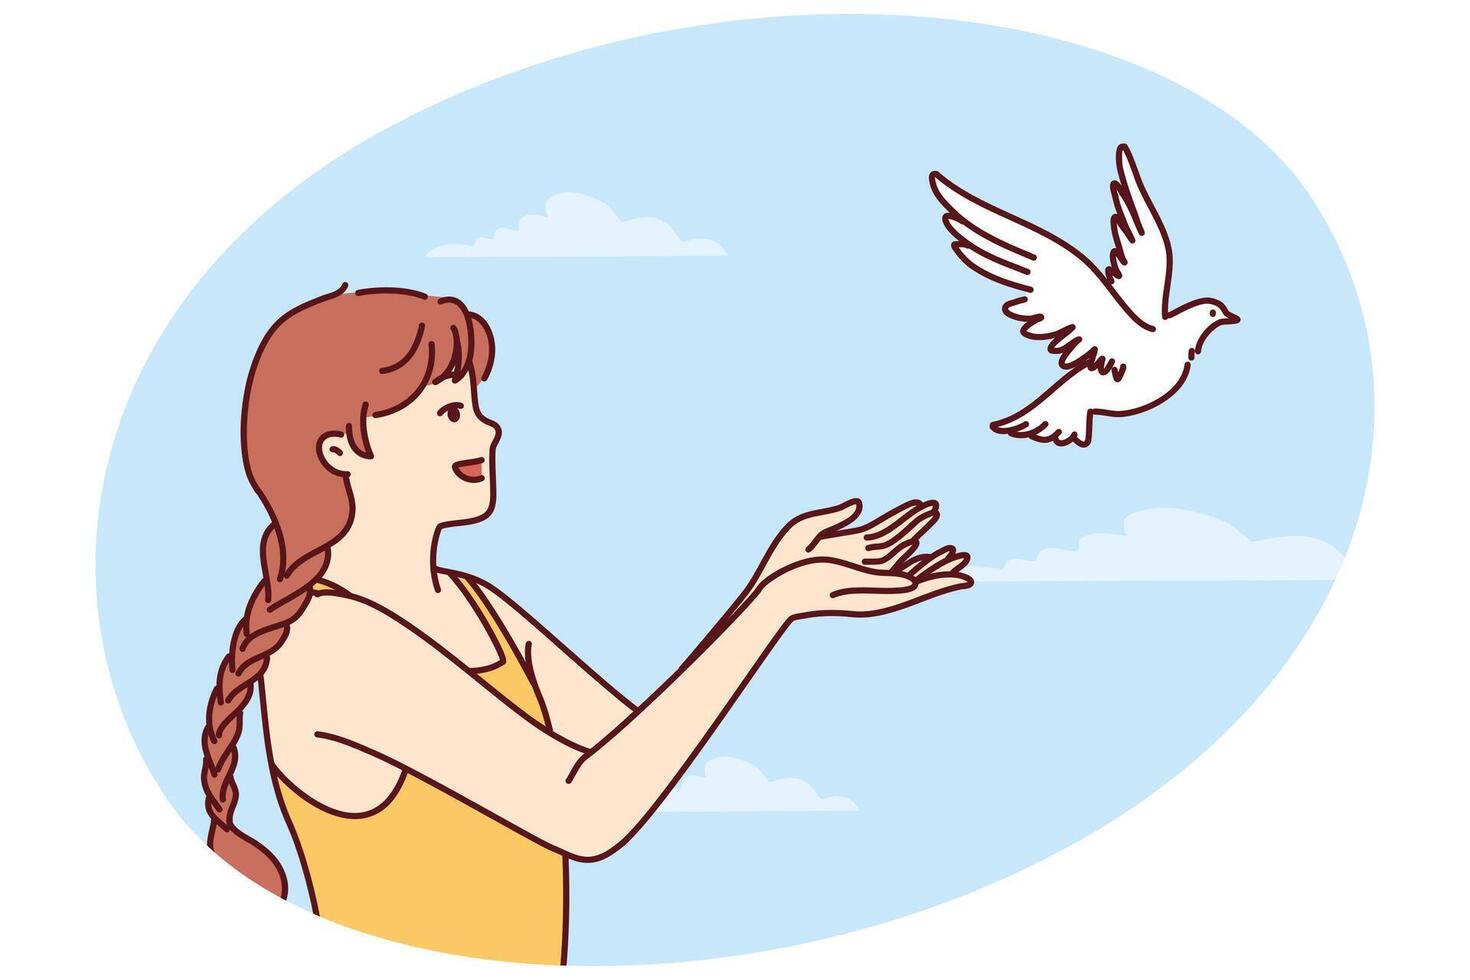 Little girl volunteers teenager sets dove free and lets bird fly towards sky for family reunion vector